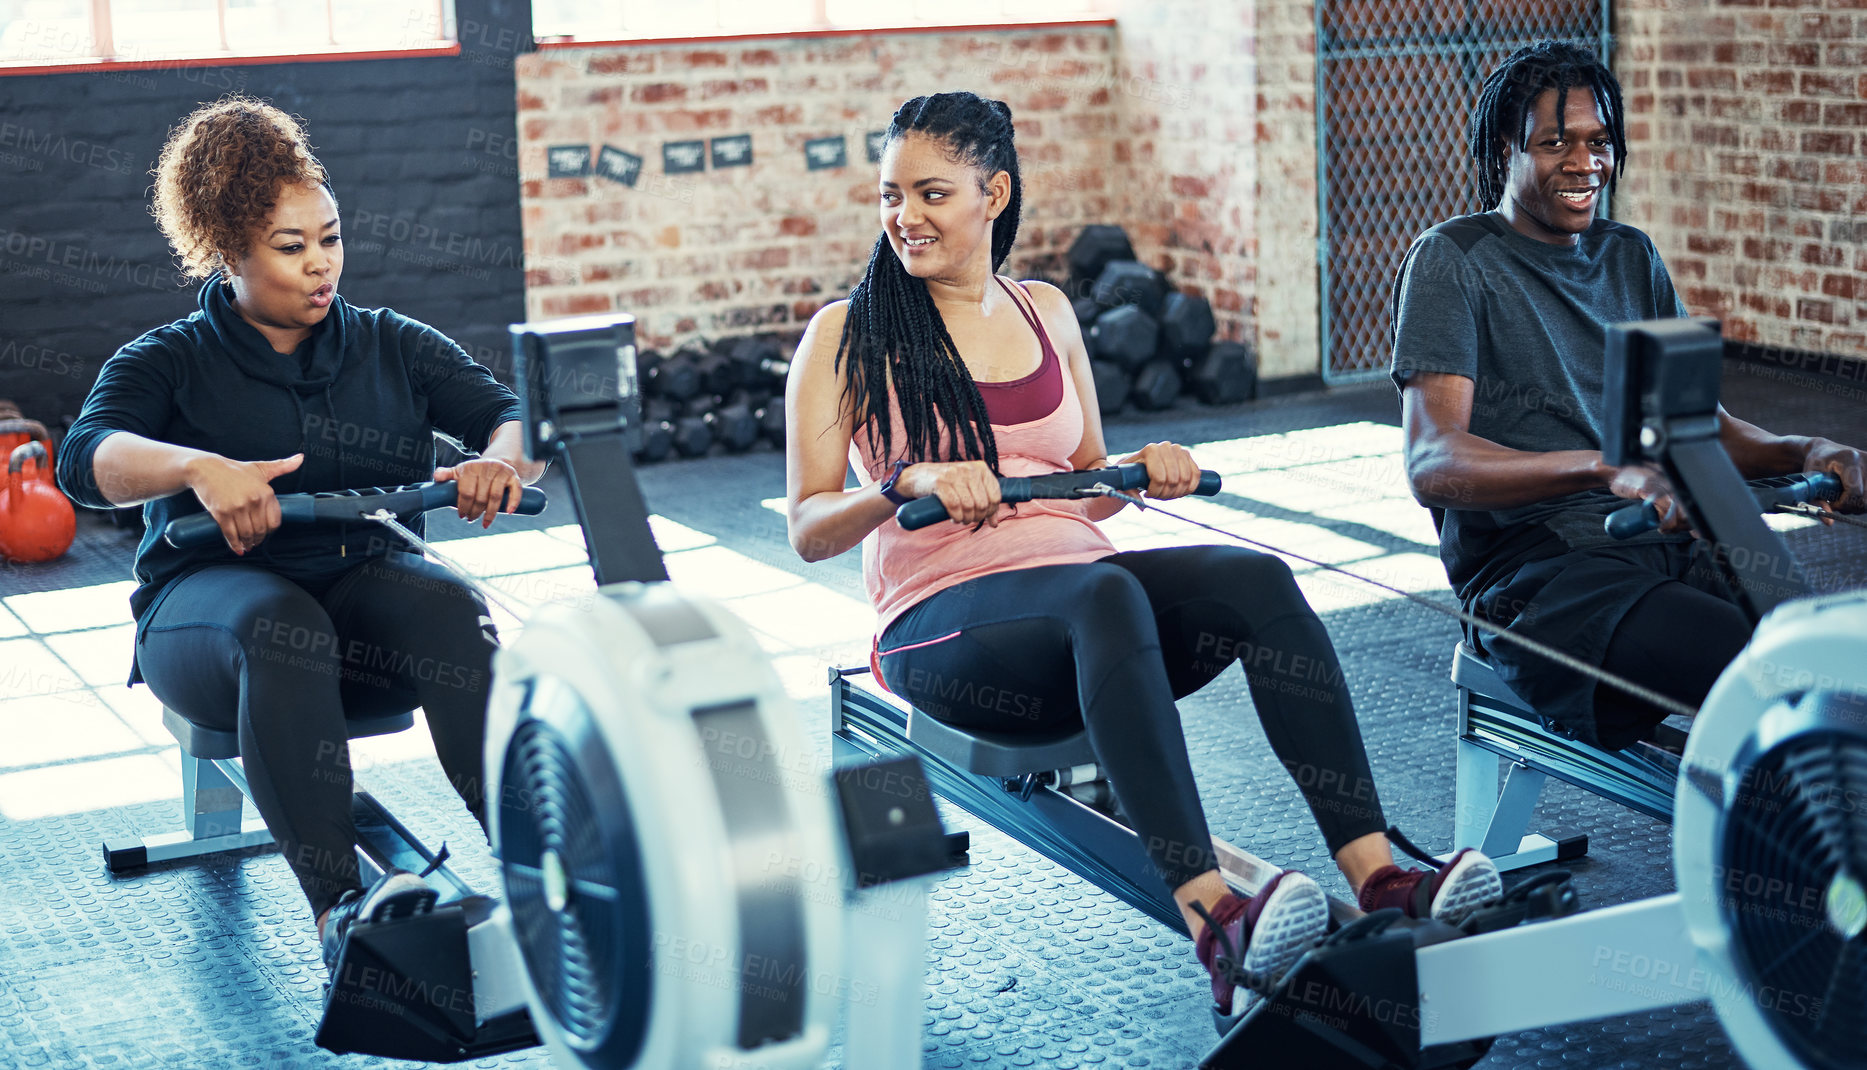 Buy stock photo Shot of a fitness group working out on rowing machines in their session at the gym